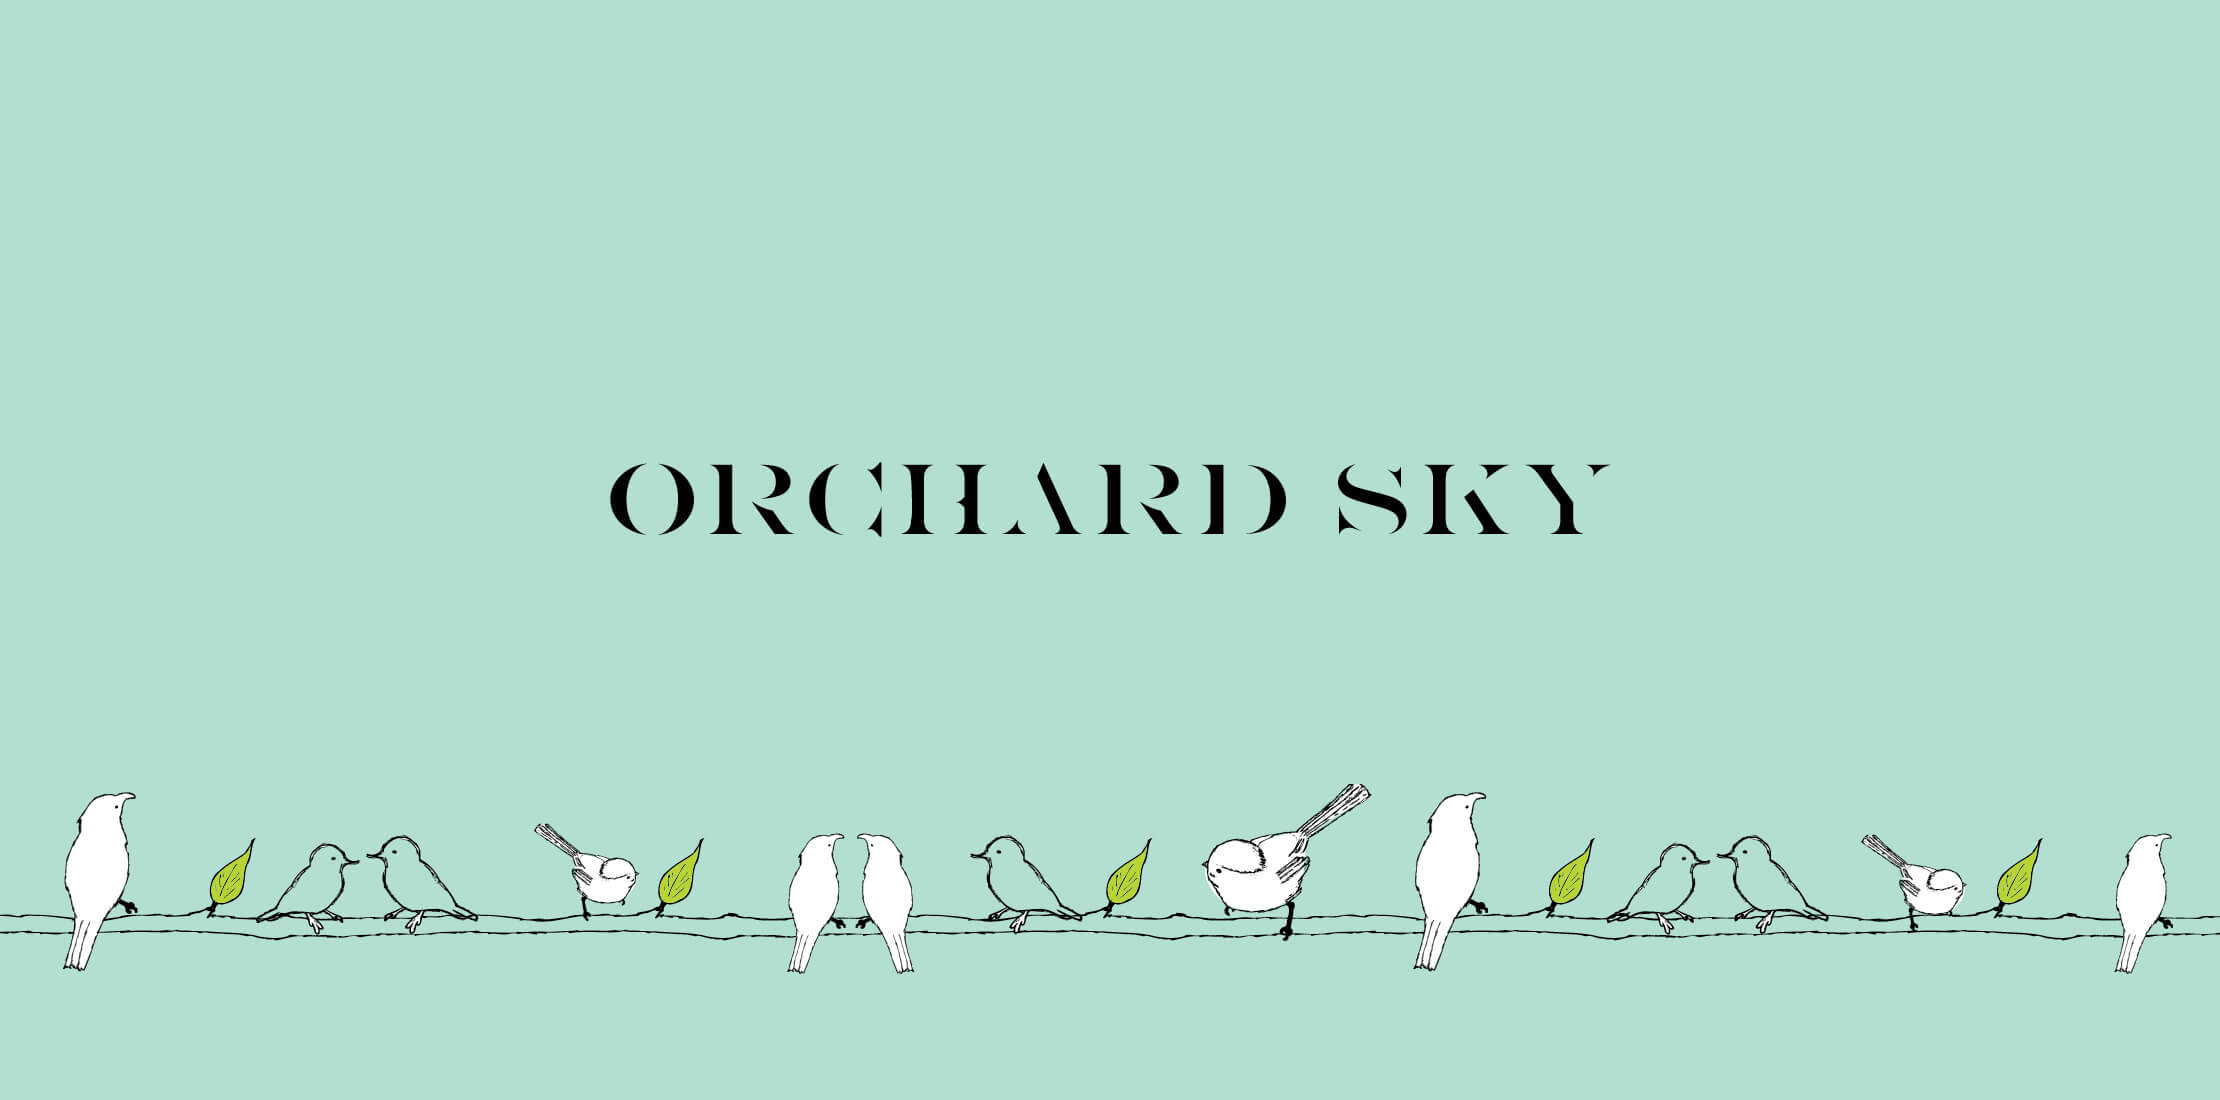 'Orchard Sky' logo in black capital letters and a hand drawn illustration of birds perched on a branch, on a mint background